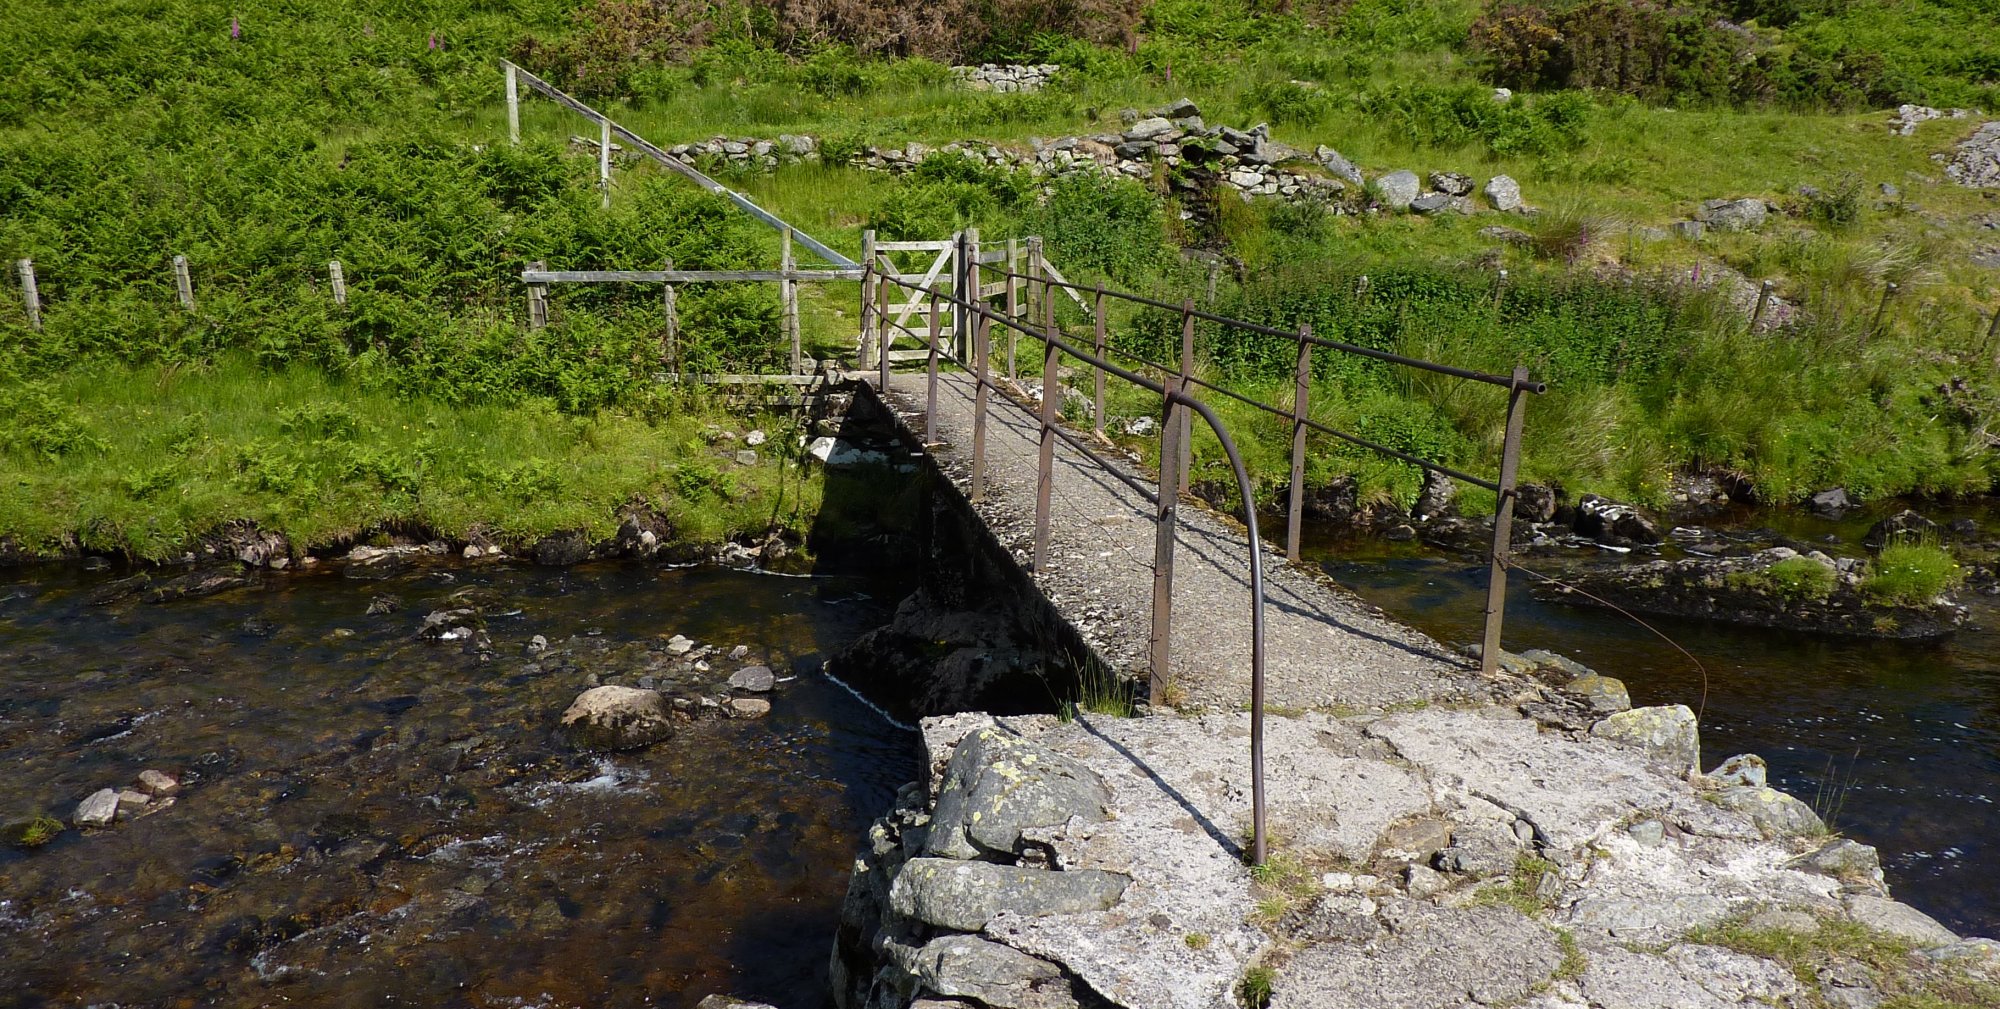 Across the bridge to reach the road into Swindale